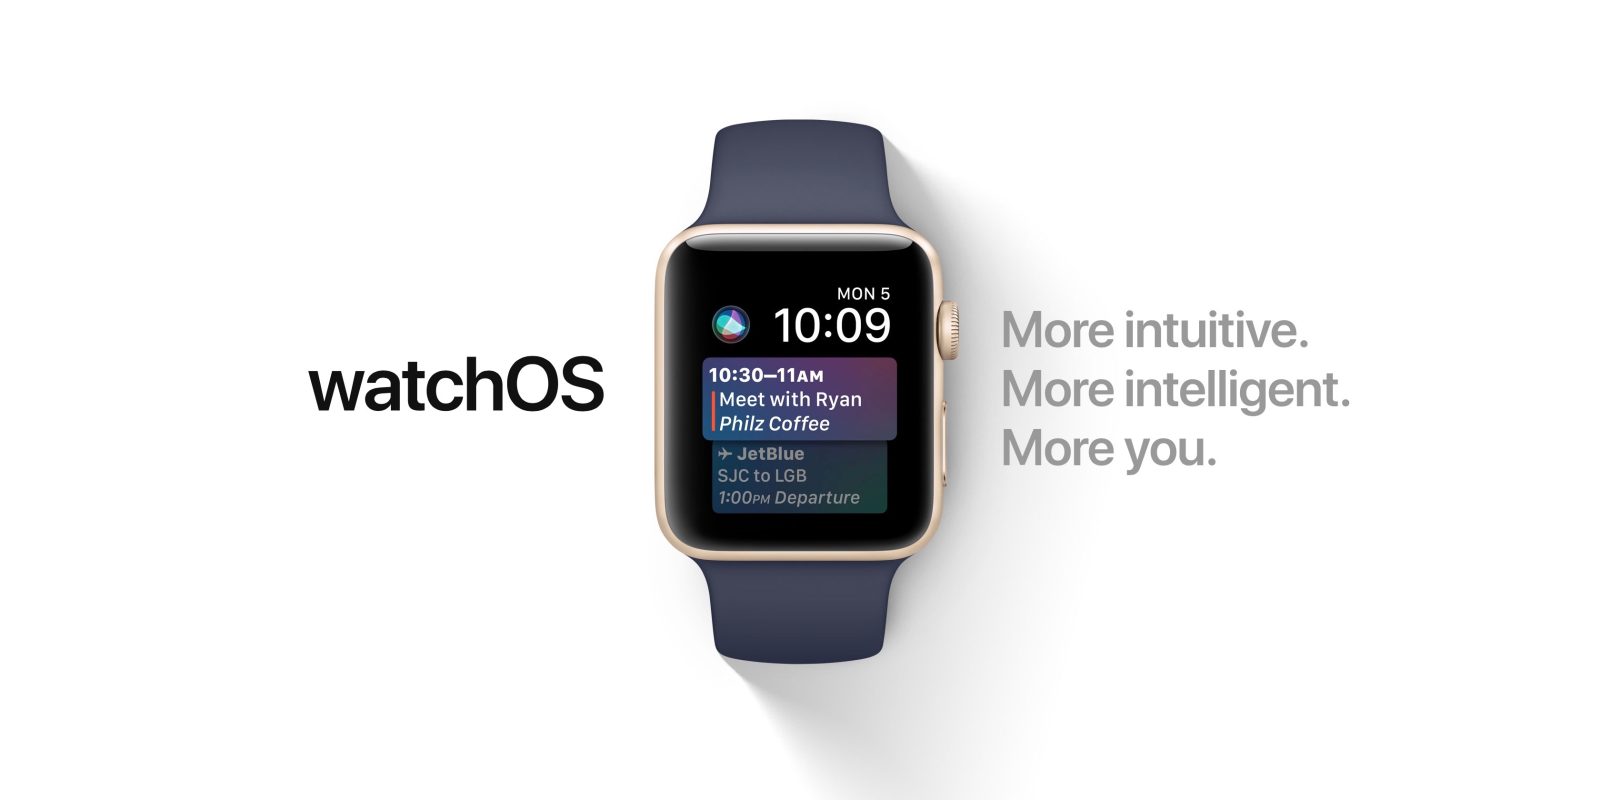 WatchOS 4 beta 4 for Apple Watch Now Available